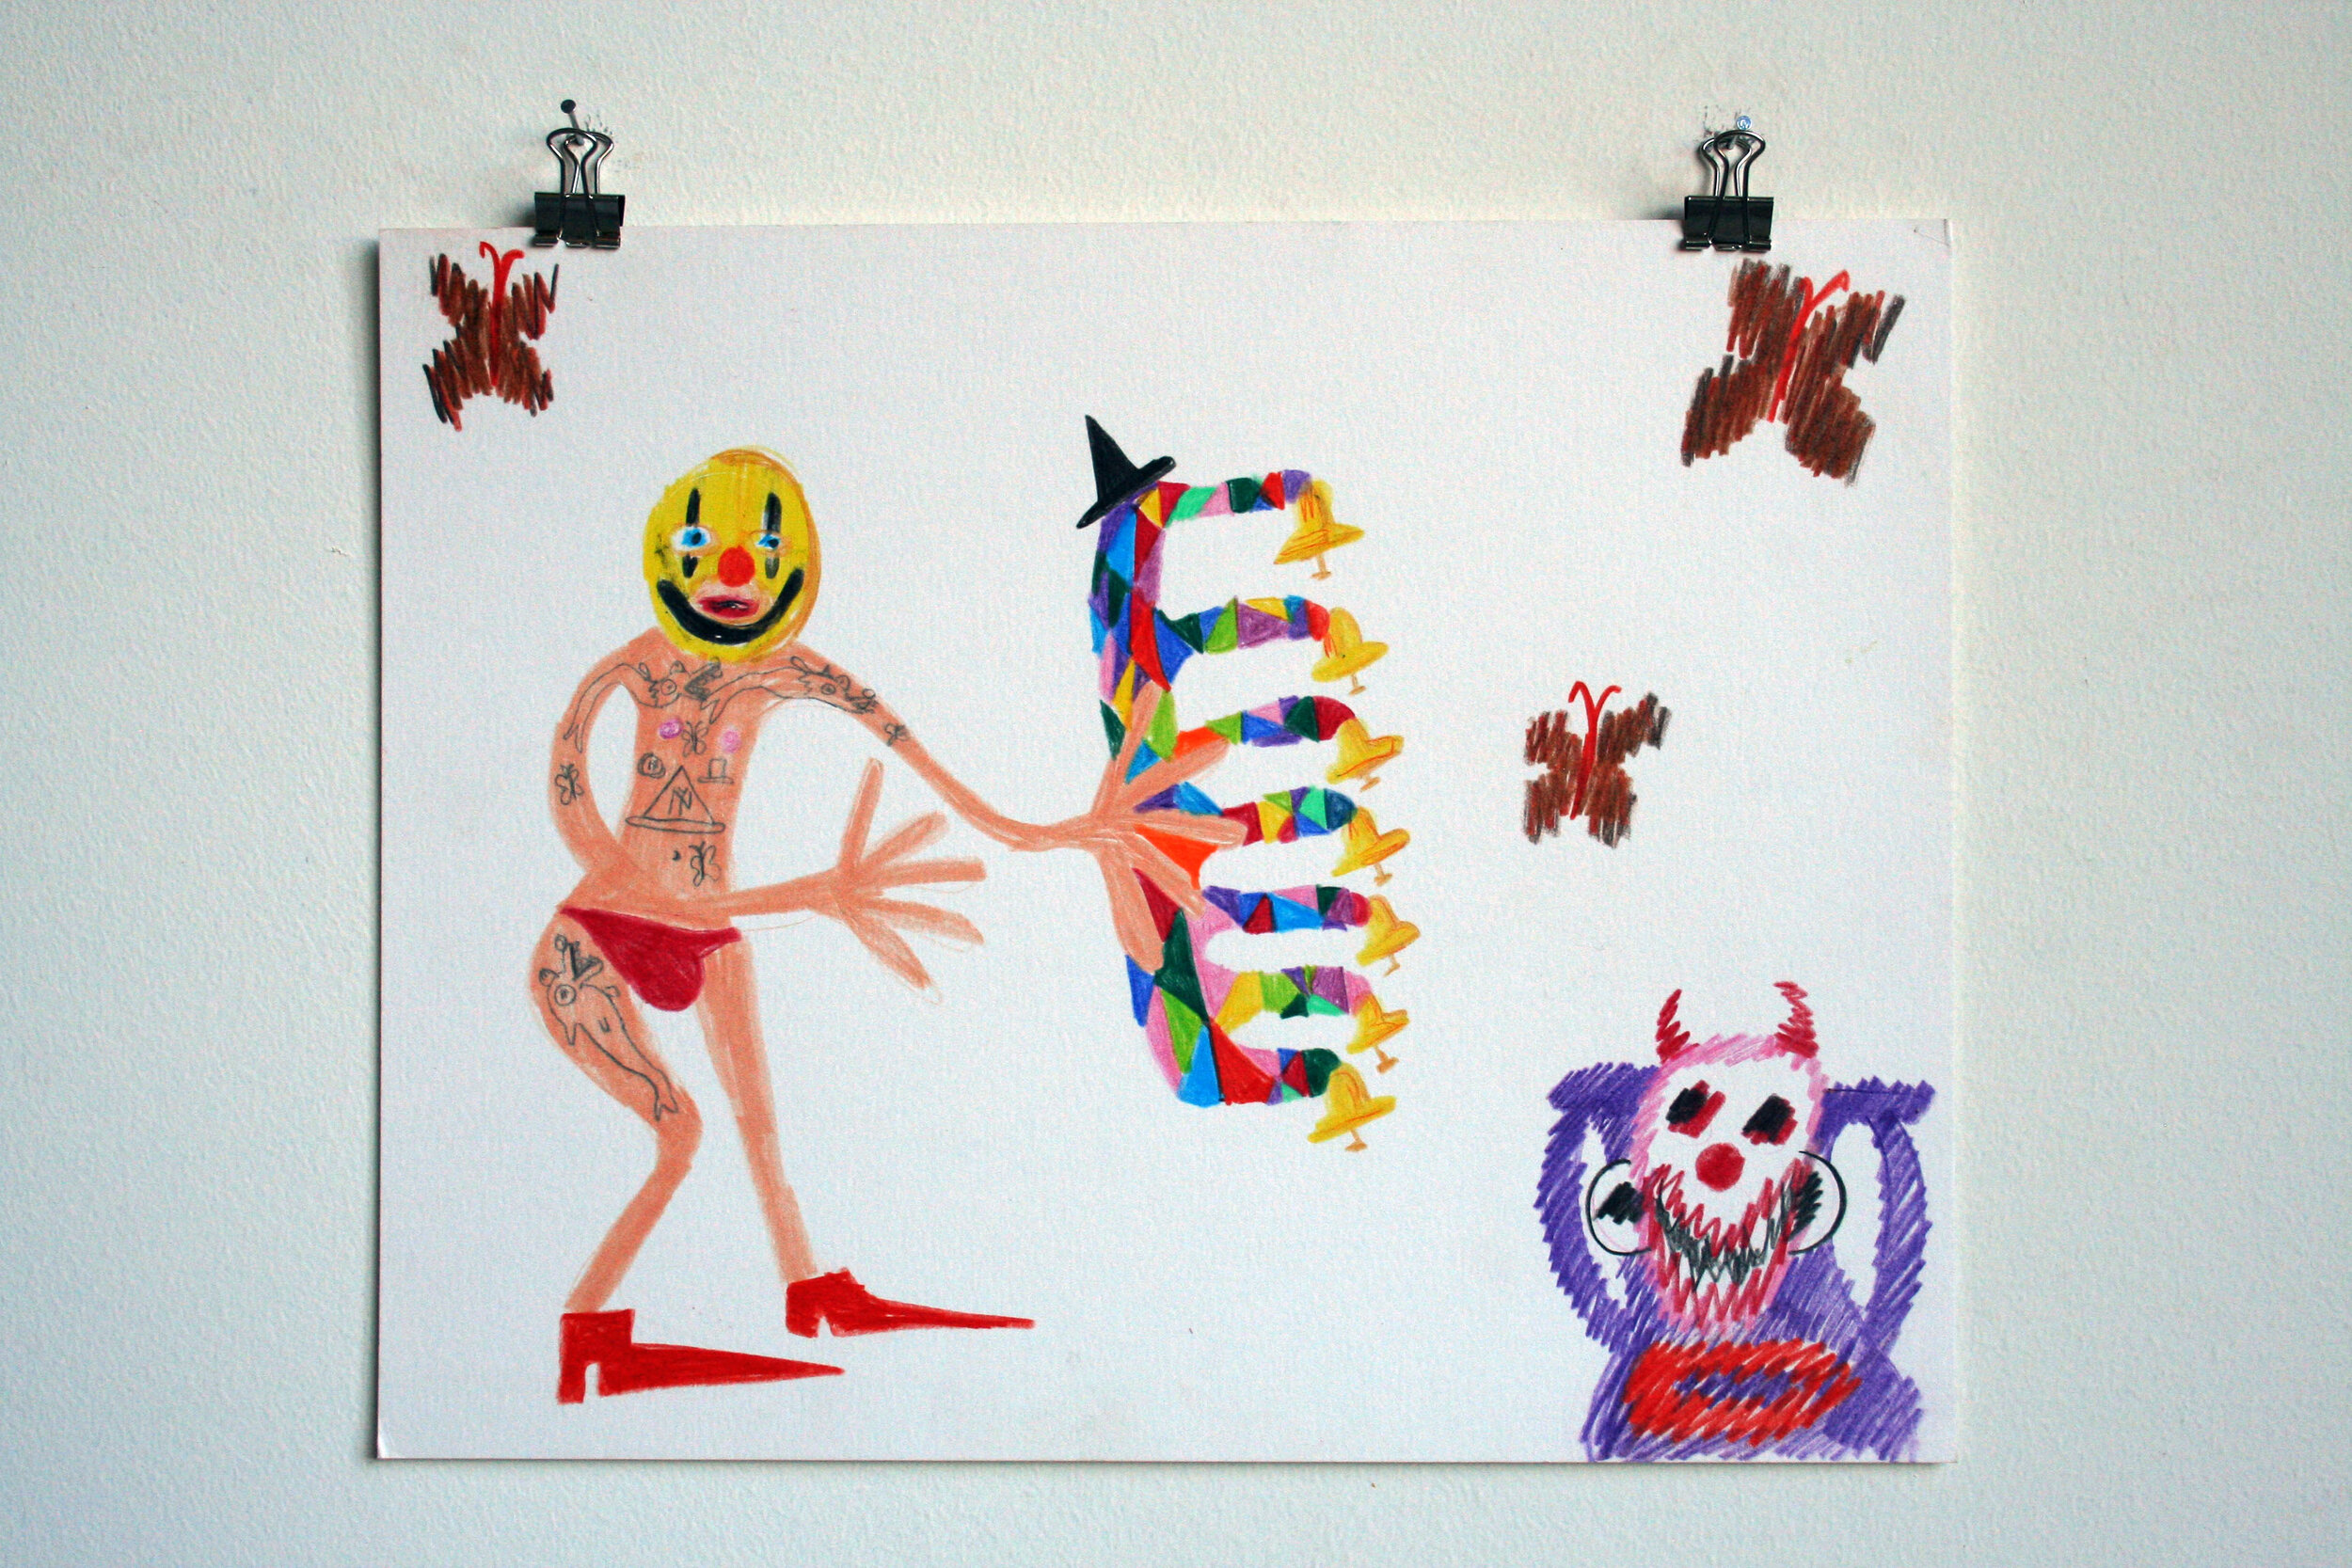   The Stripper Had a Jester-Comb with Bells Called an “Ugly Stick” , 2013  11 x 14 inches (27.94 x 35.56 cm.)  colored pencil on paper 